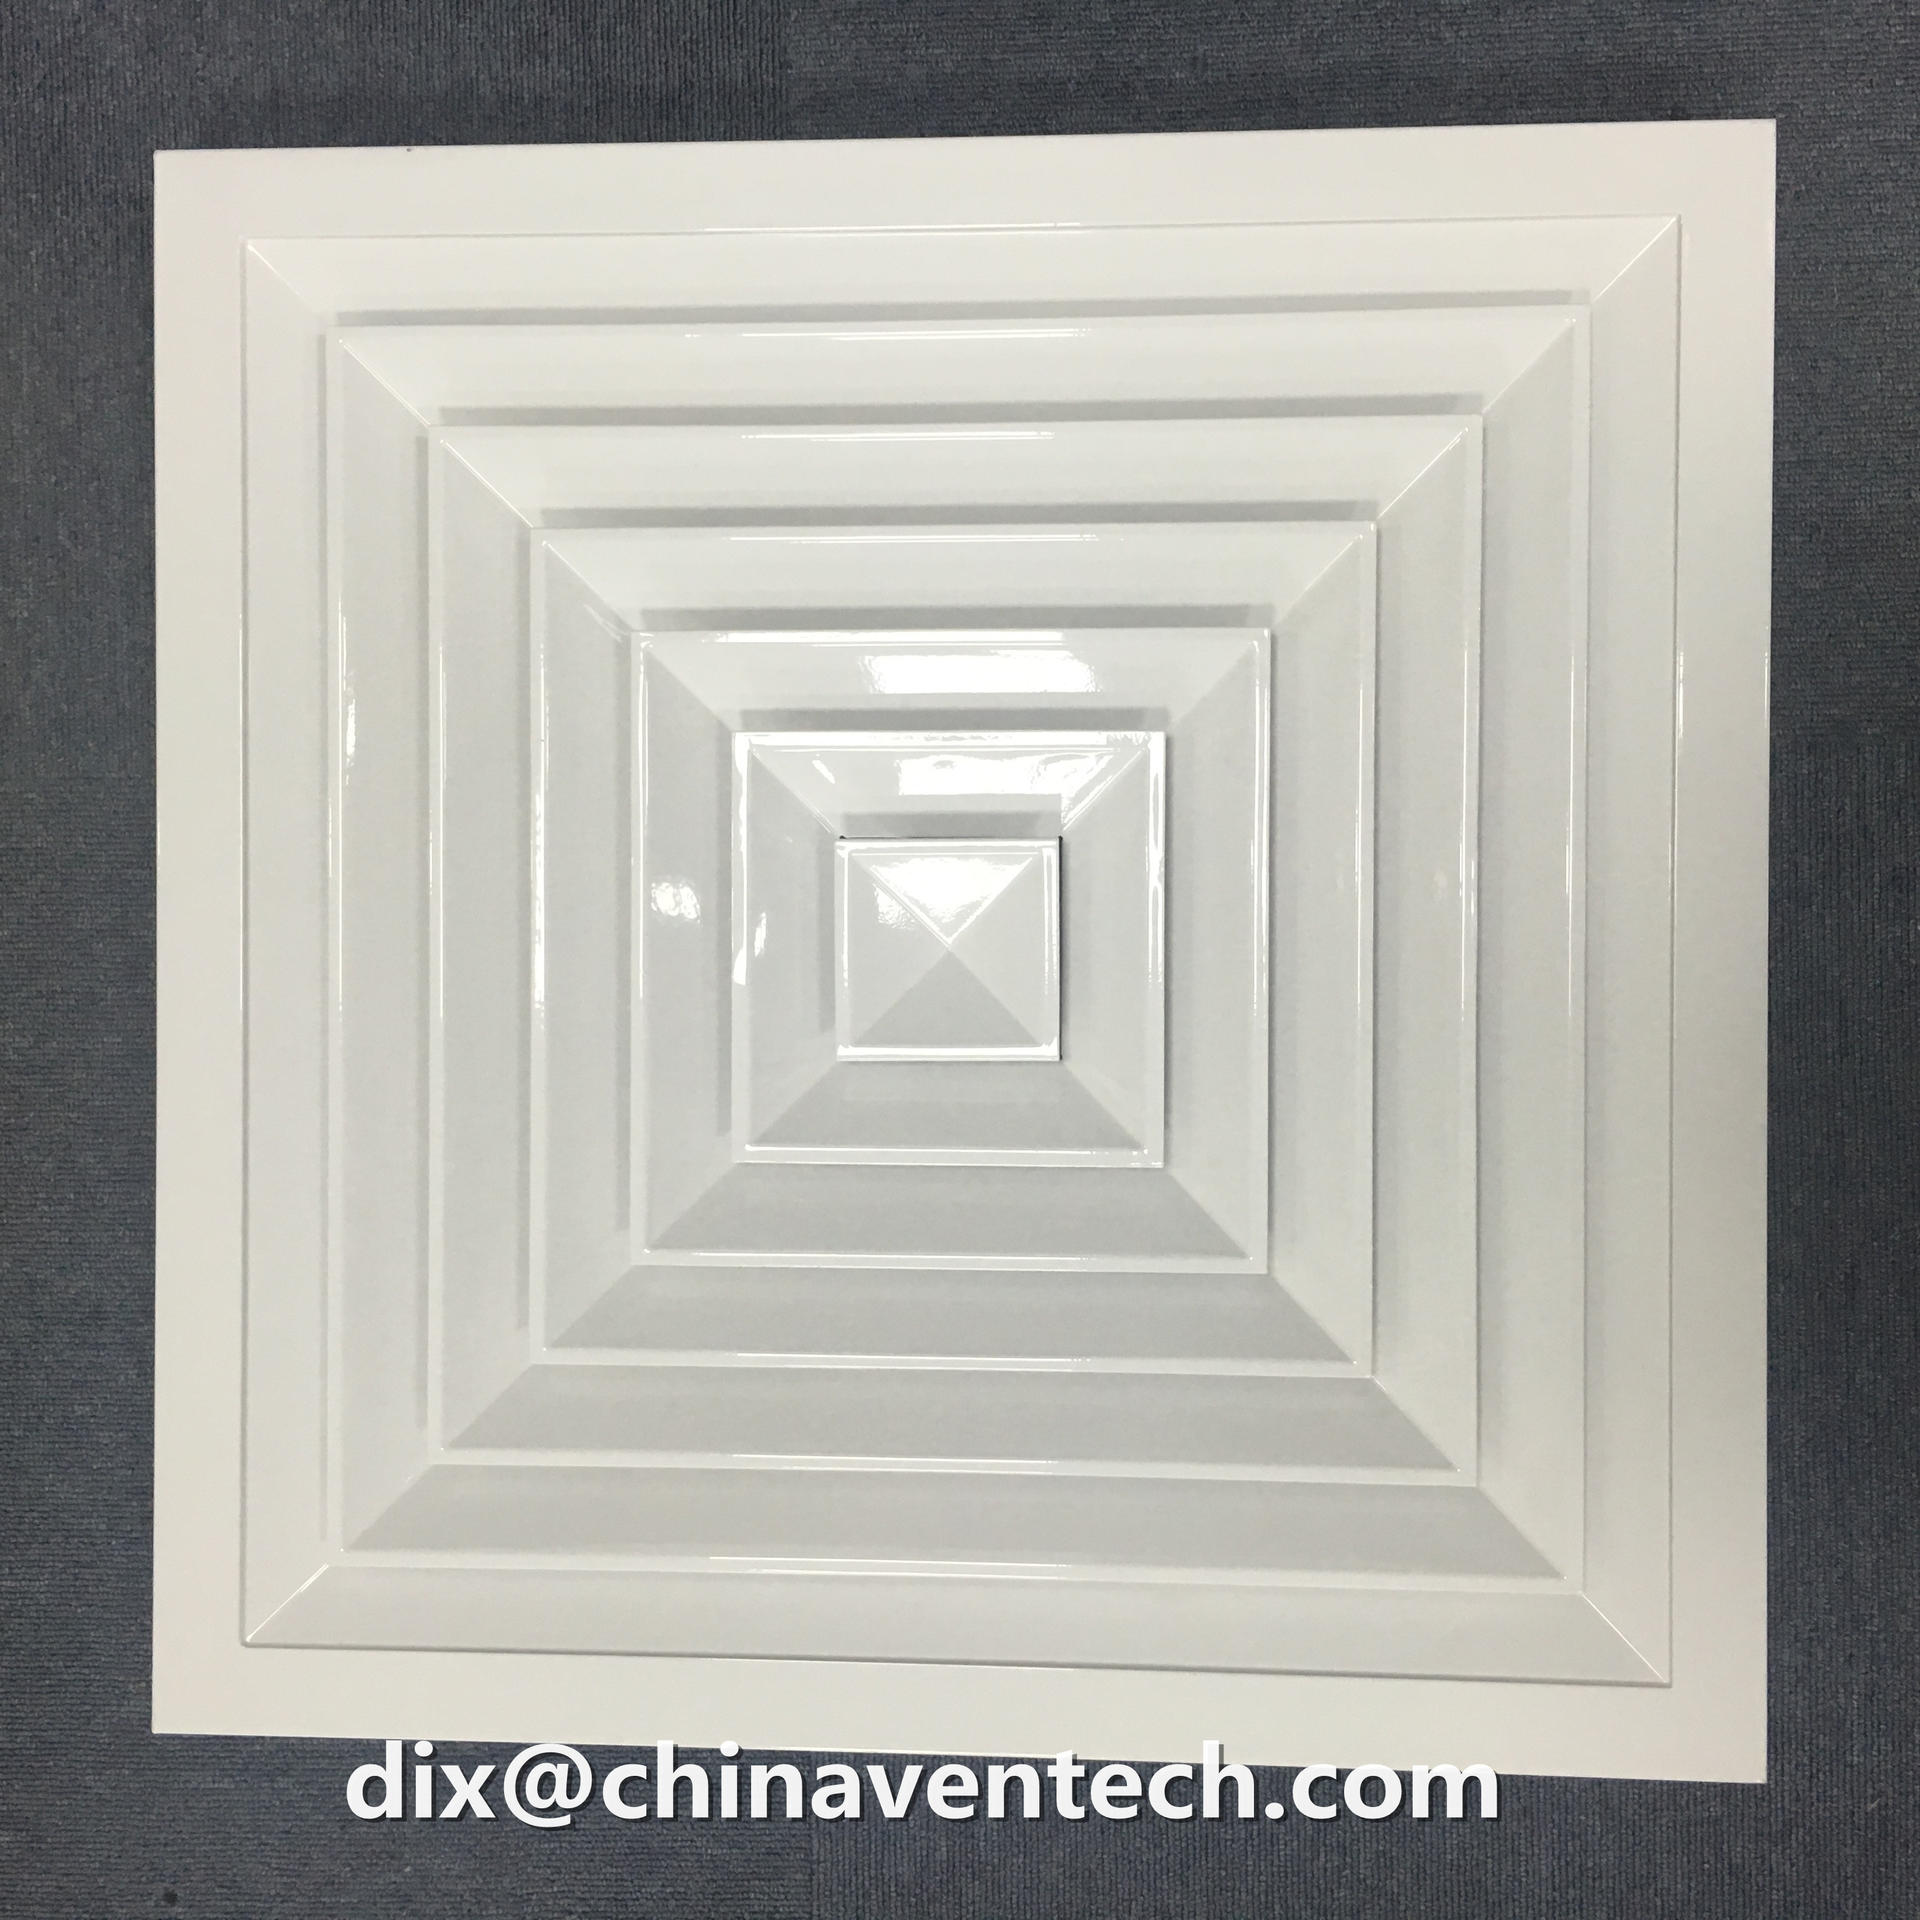 HVAC 24x24 return grille for drop ceiling square 4 way air vent diffuser